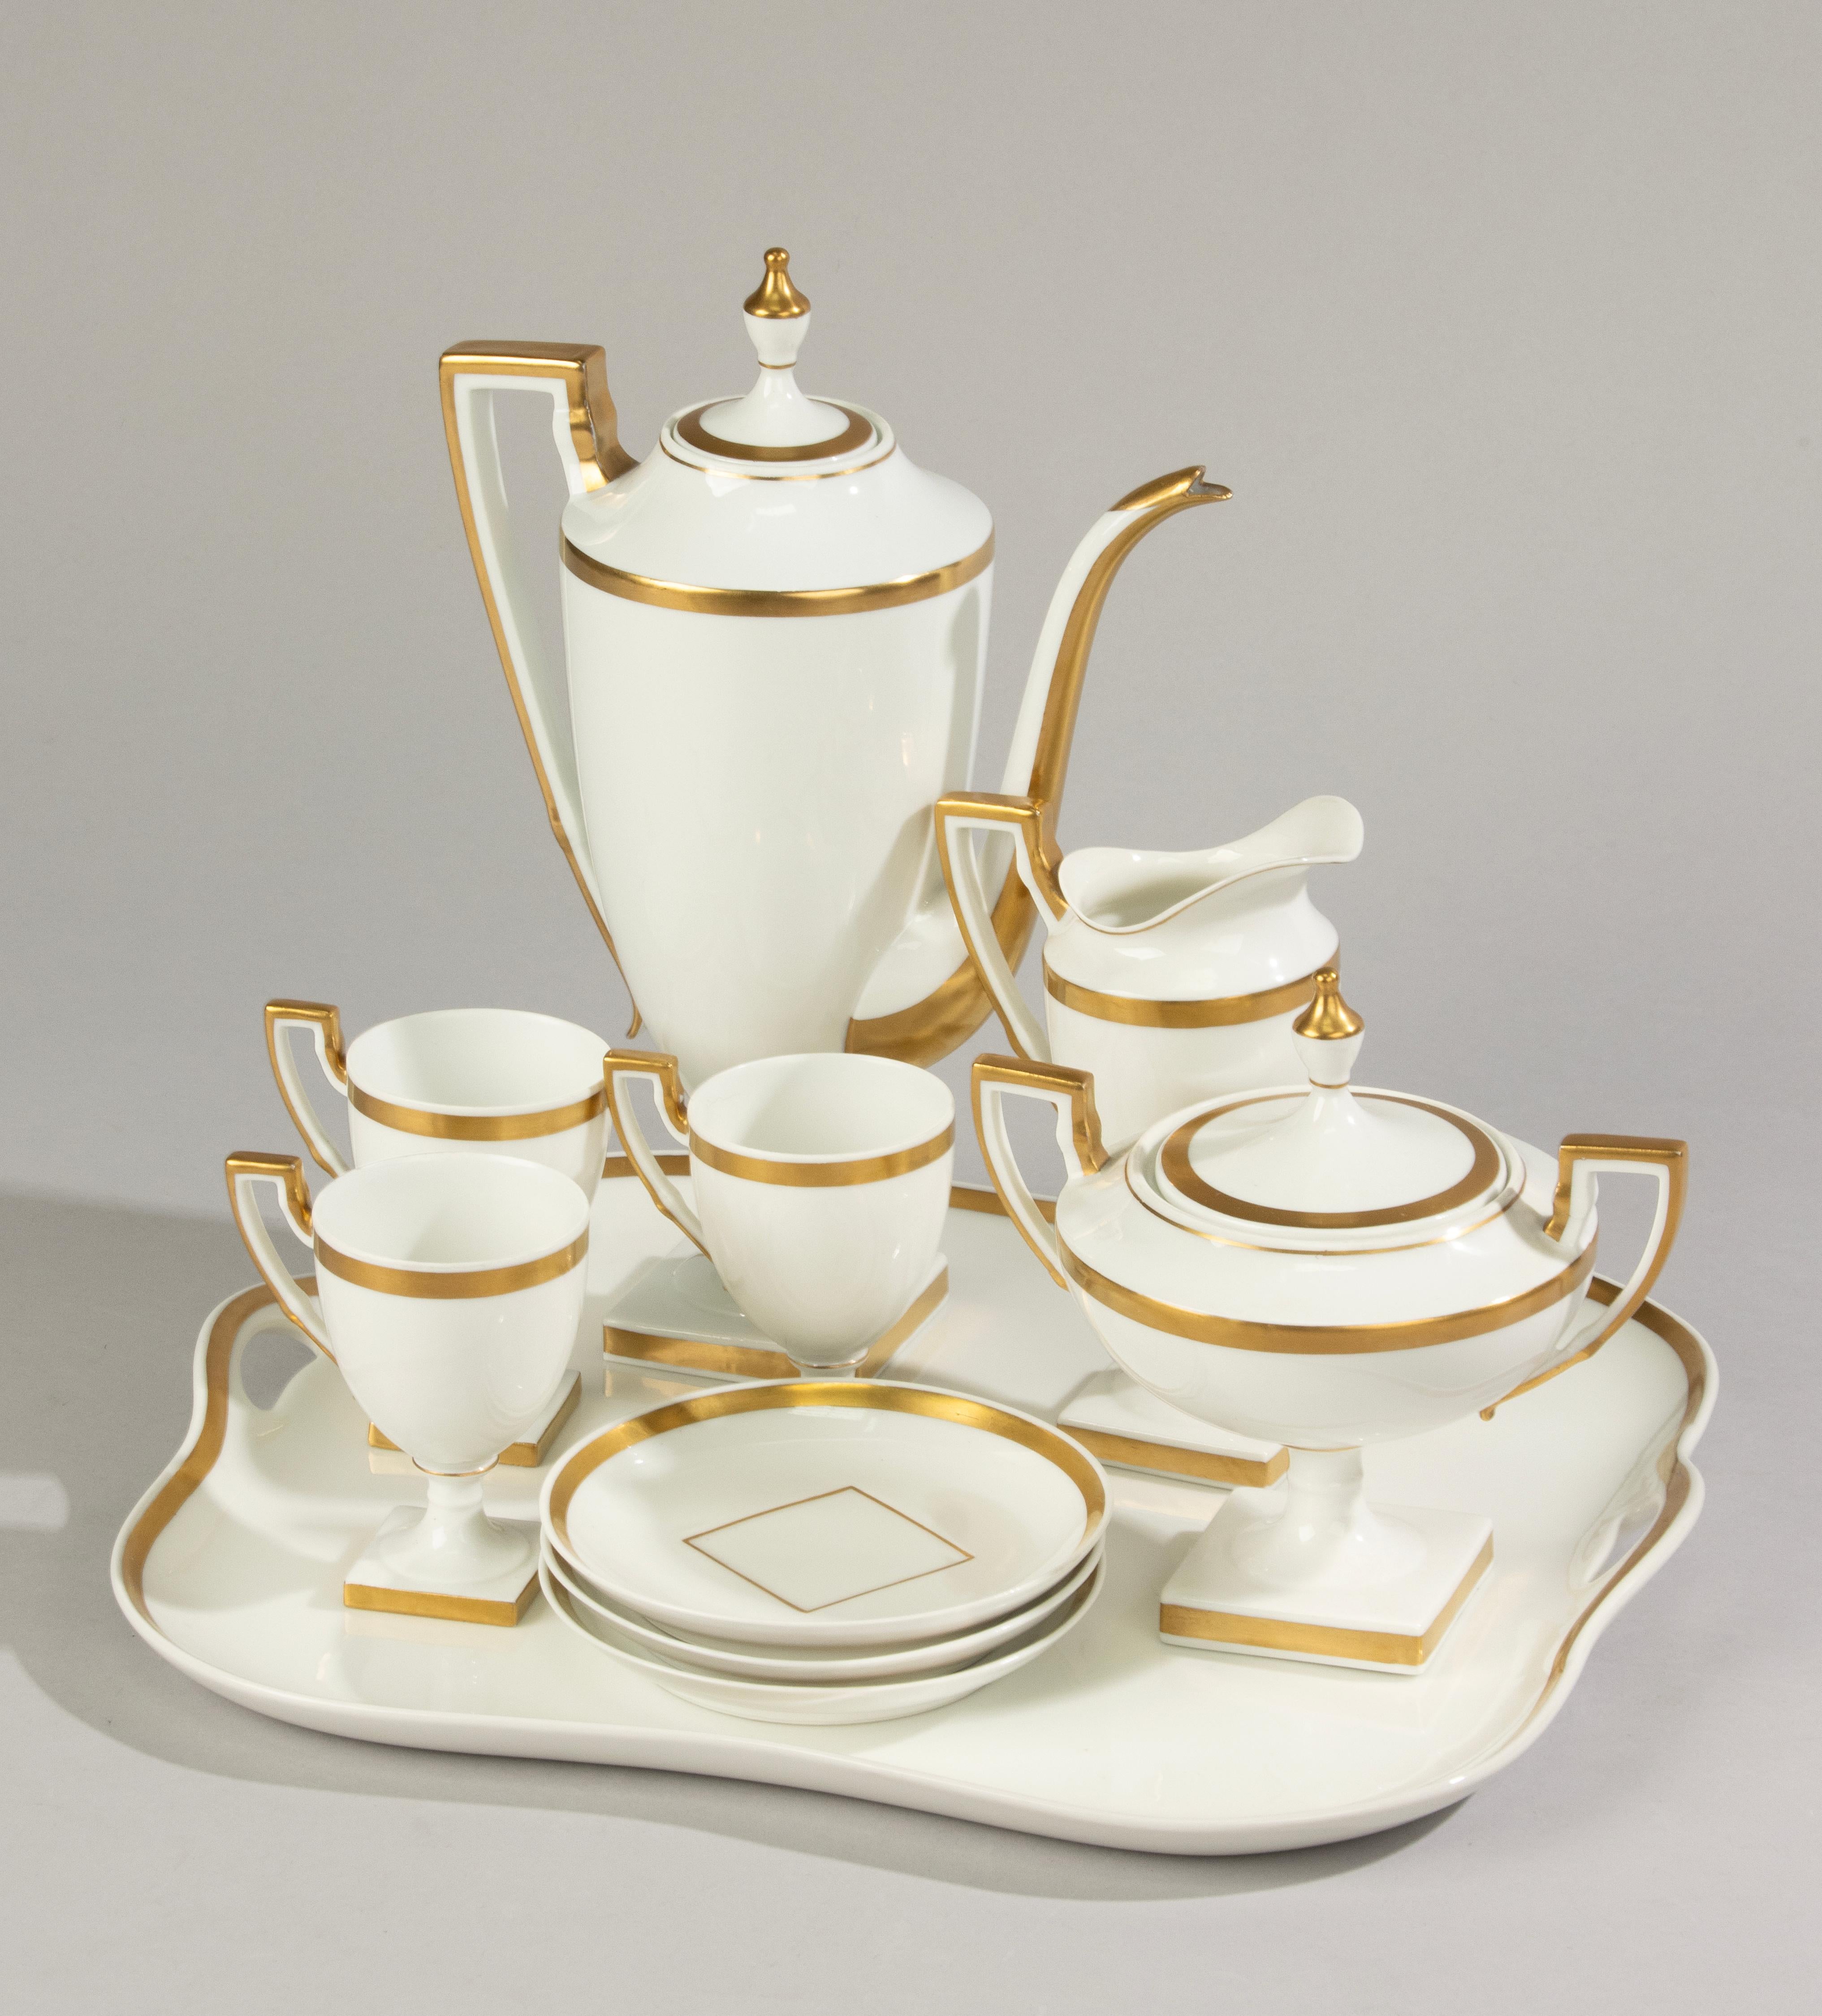 A beautiful antique porcelain coffee set from the French brand Limoges (Paroutaud Frères La Seynie). Beautiful slender design in Empire style. Very fine porcelain, hand-painted with gold trims.
- Tray 36 x 31 cm
- Coffee pot 28 cm high
- Milk jug 15